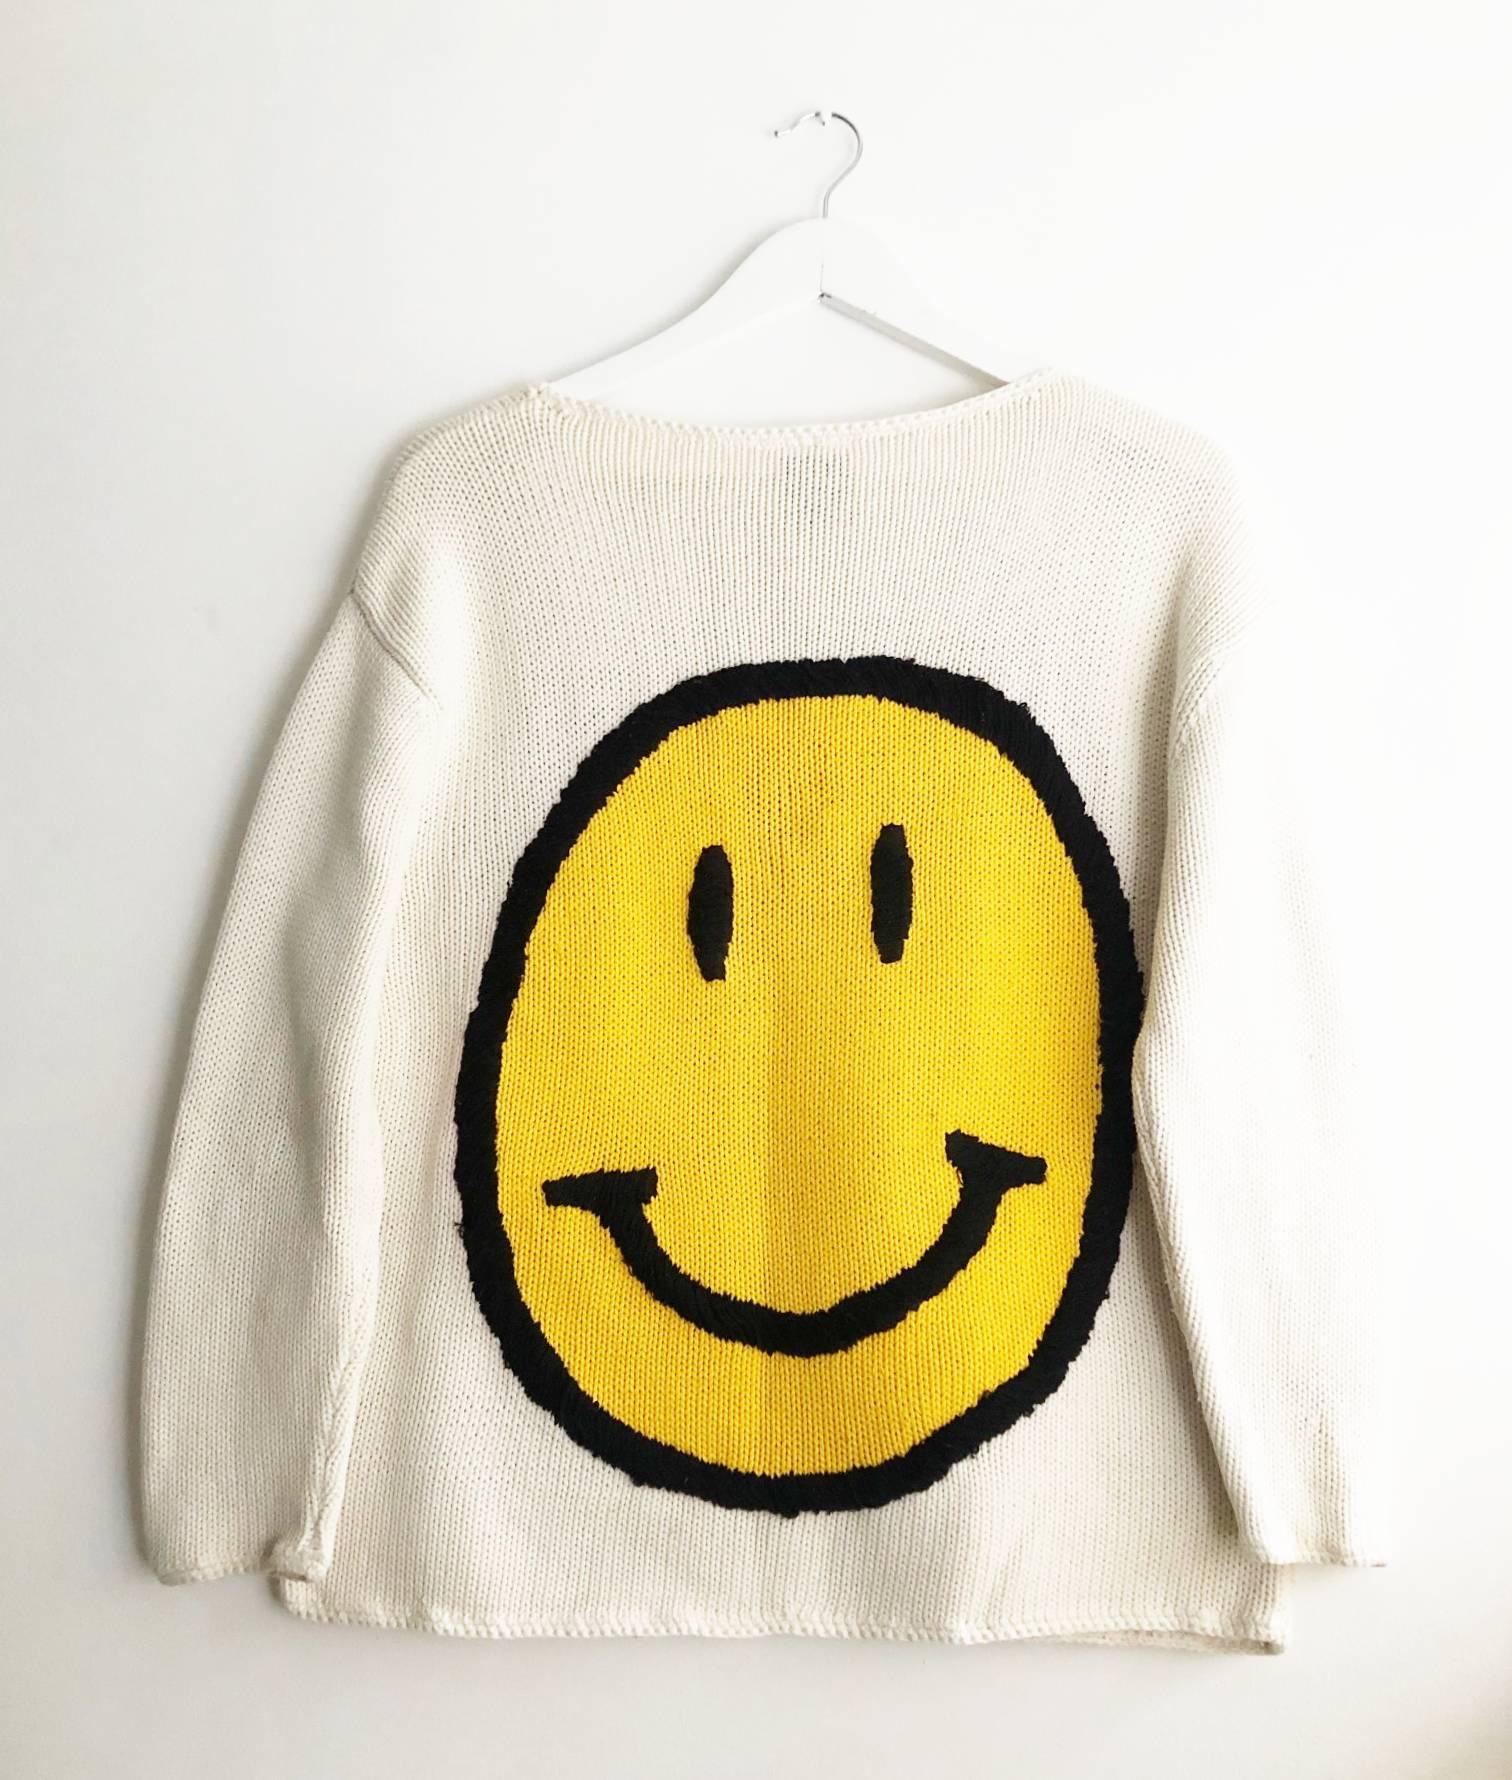 Moschino Cheap and Chic Acid Face Jumper, very rare from the 90s, cream white Cable-Knit cotton/wool, round neck, long sleeves, baggy look

size: 40/42 Italian
Vintage, 1980s/1990s, very good condition